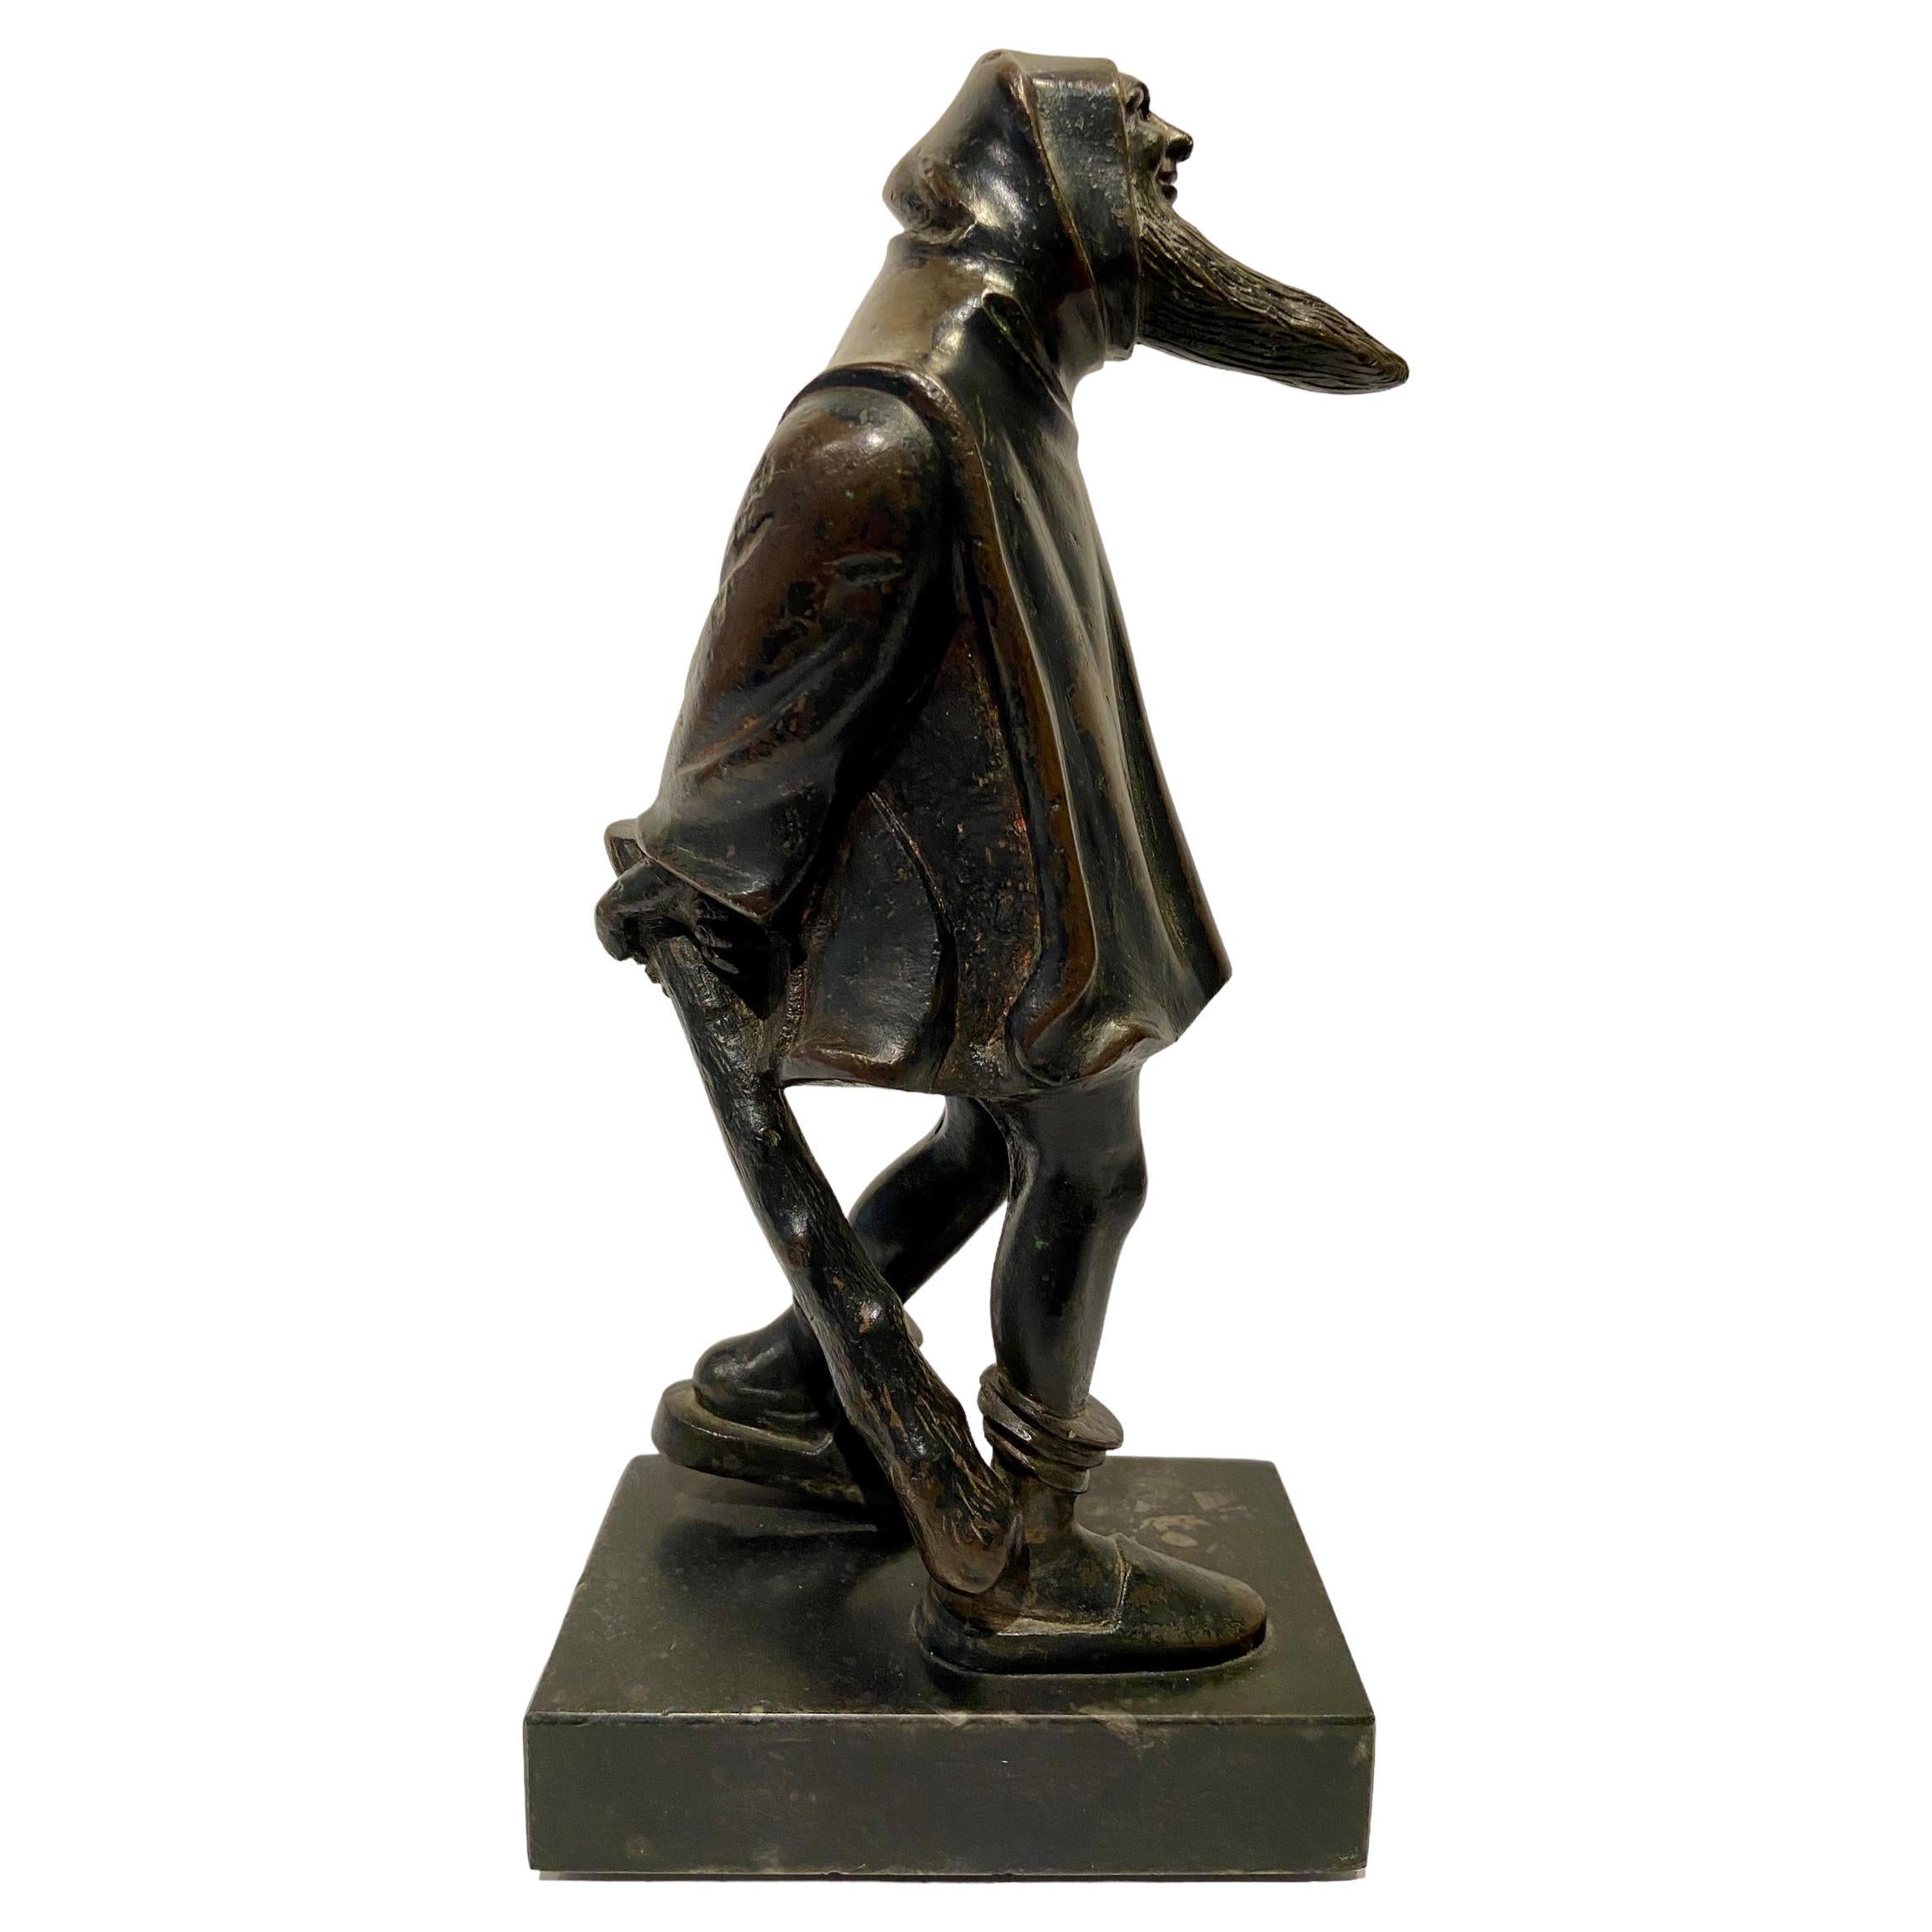 Savage or folk story figure in bronze. For Sale